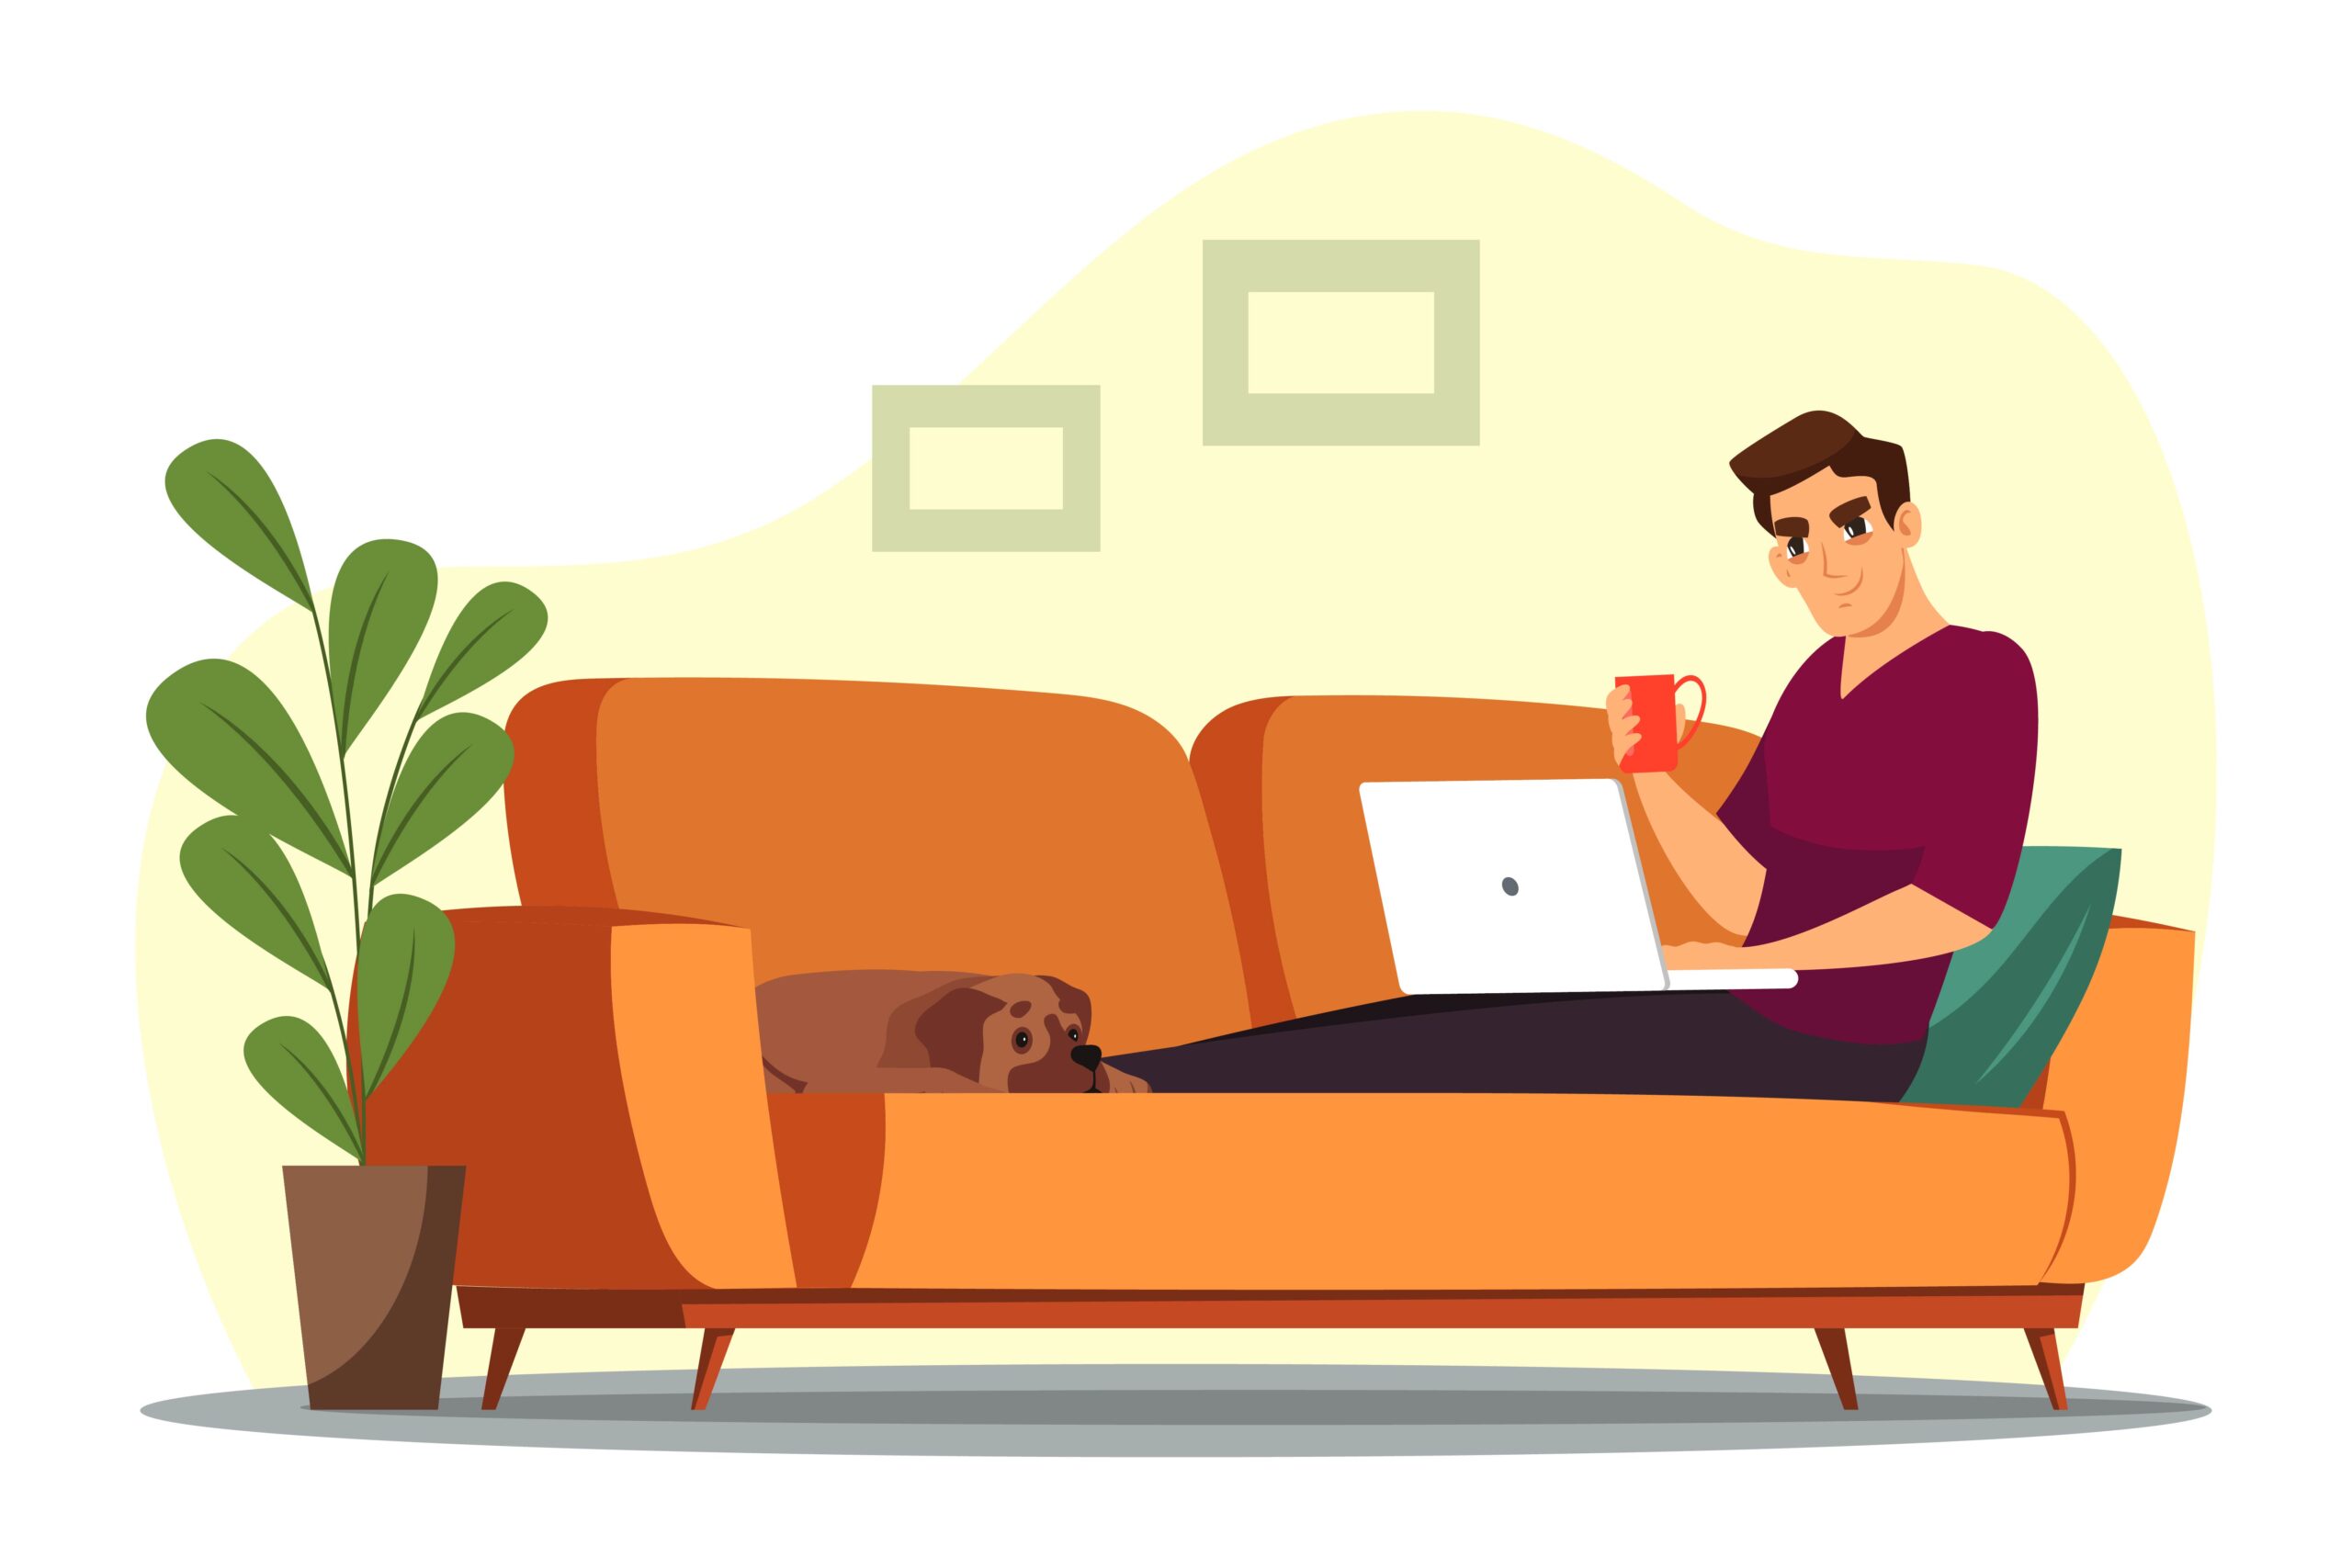 The benefits and drawbacks of remote work and its impact on work-life balance